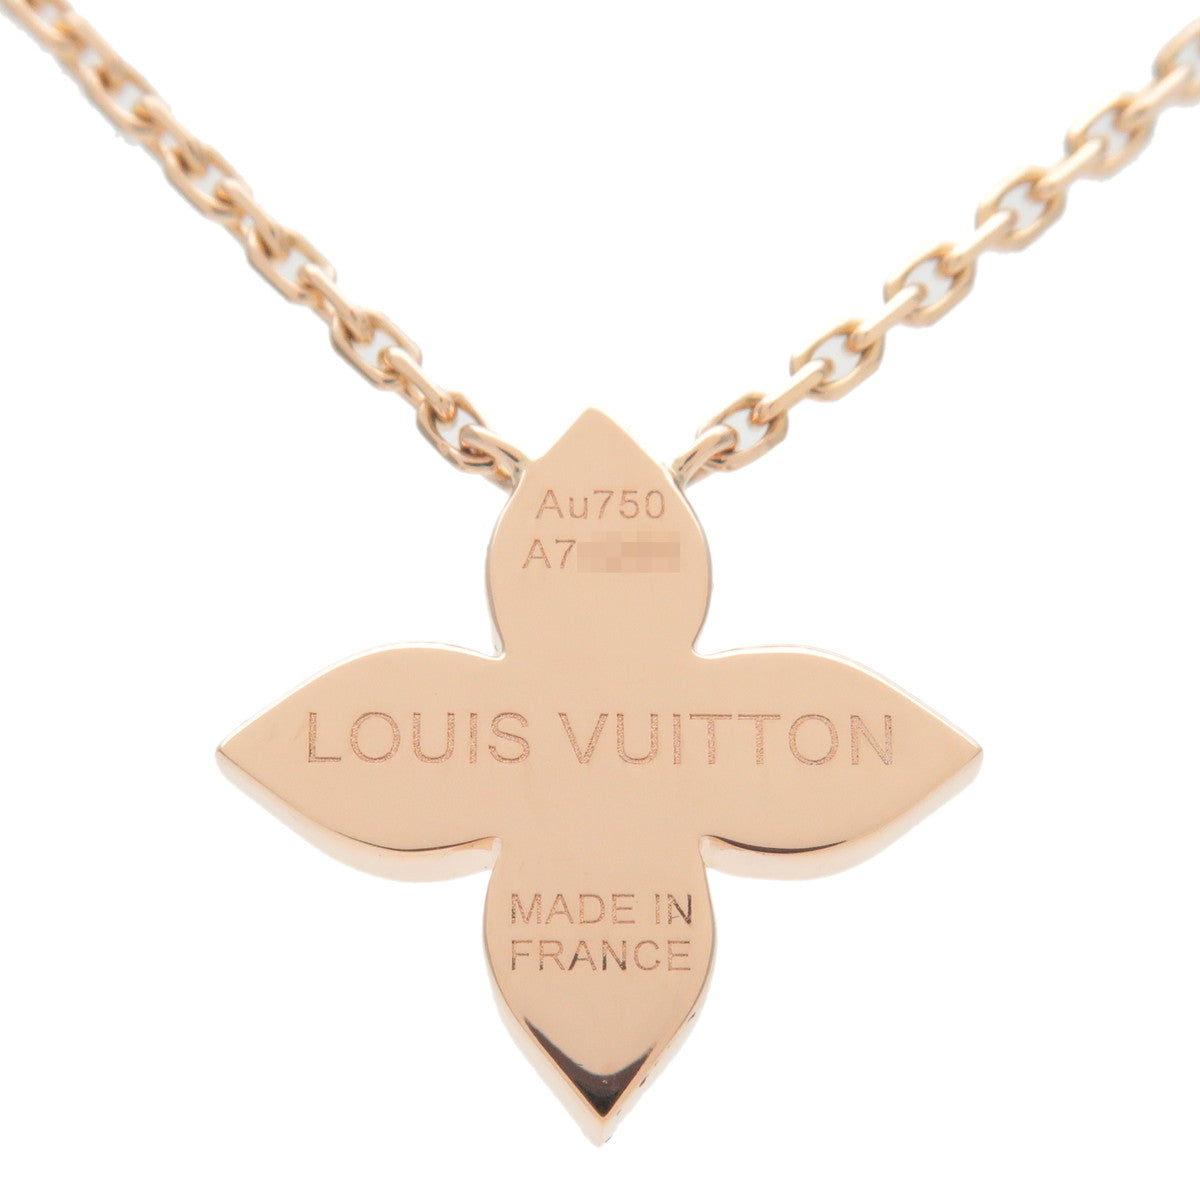 Louis Vuitton Star Blossom gold necklace and earrings with